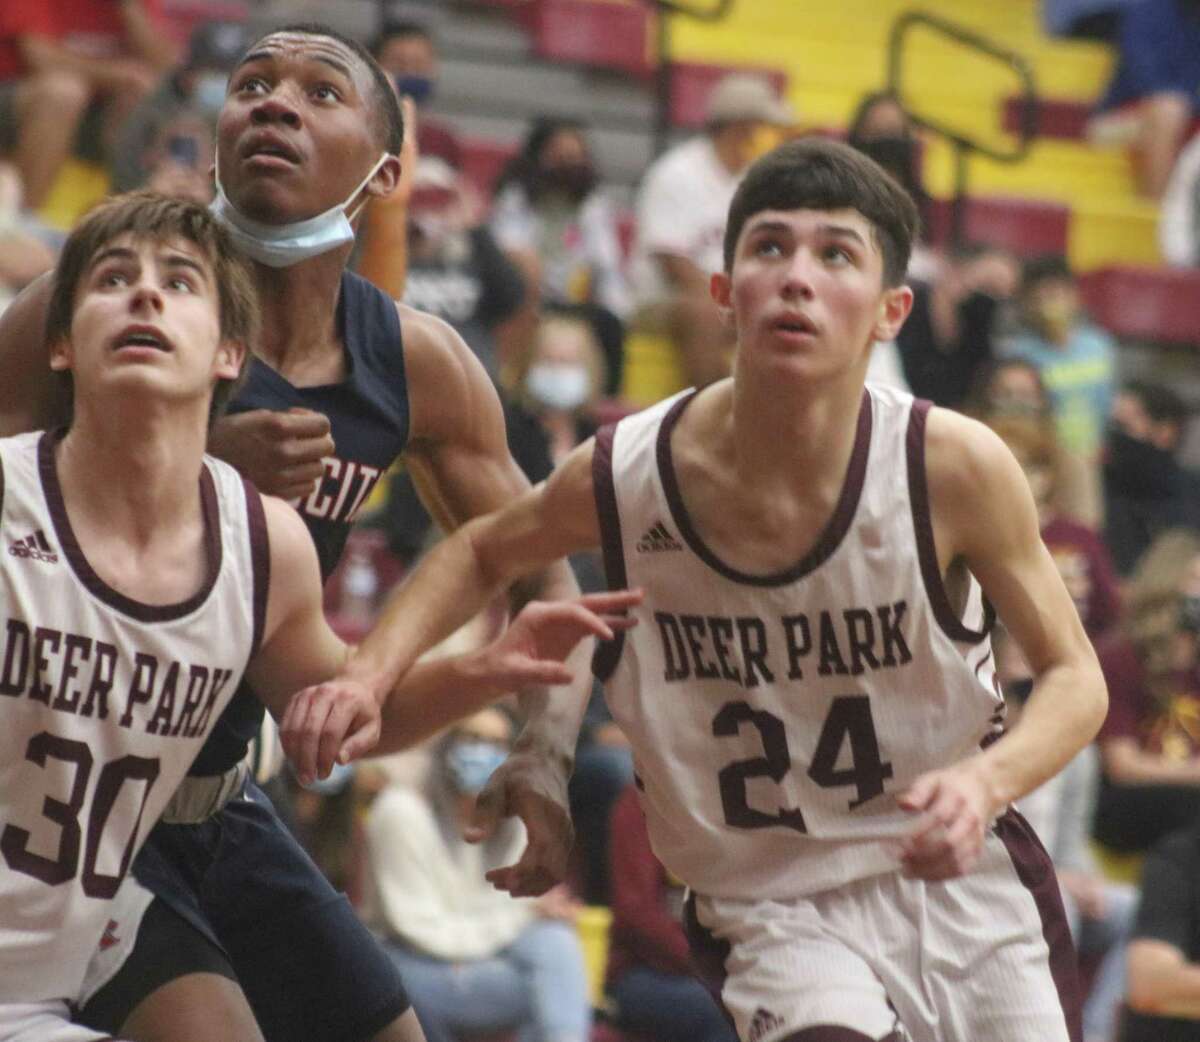 The Deer Park duo of Garrett Topping (left) and Andrew Aguilar  put the squeeze on Atascocita's Tom Hart as the three vie for a possible rebound Tuesday night.